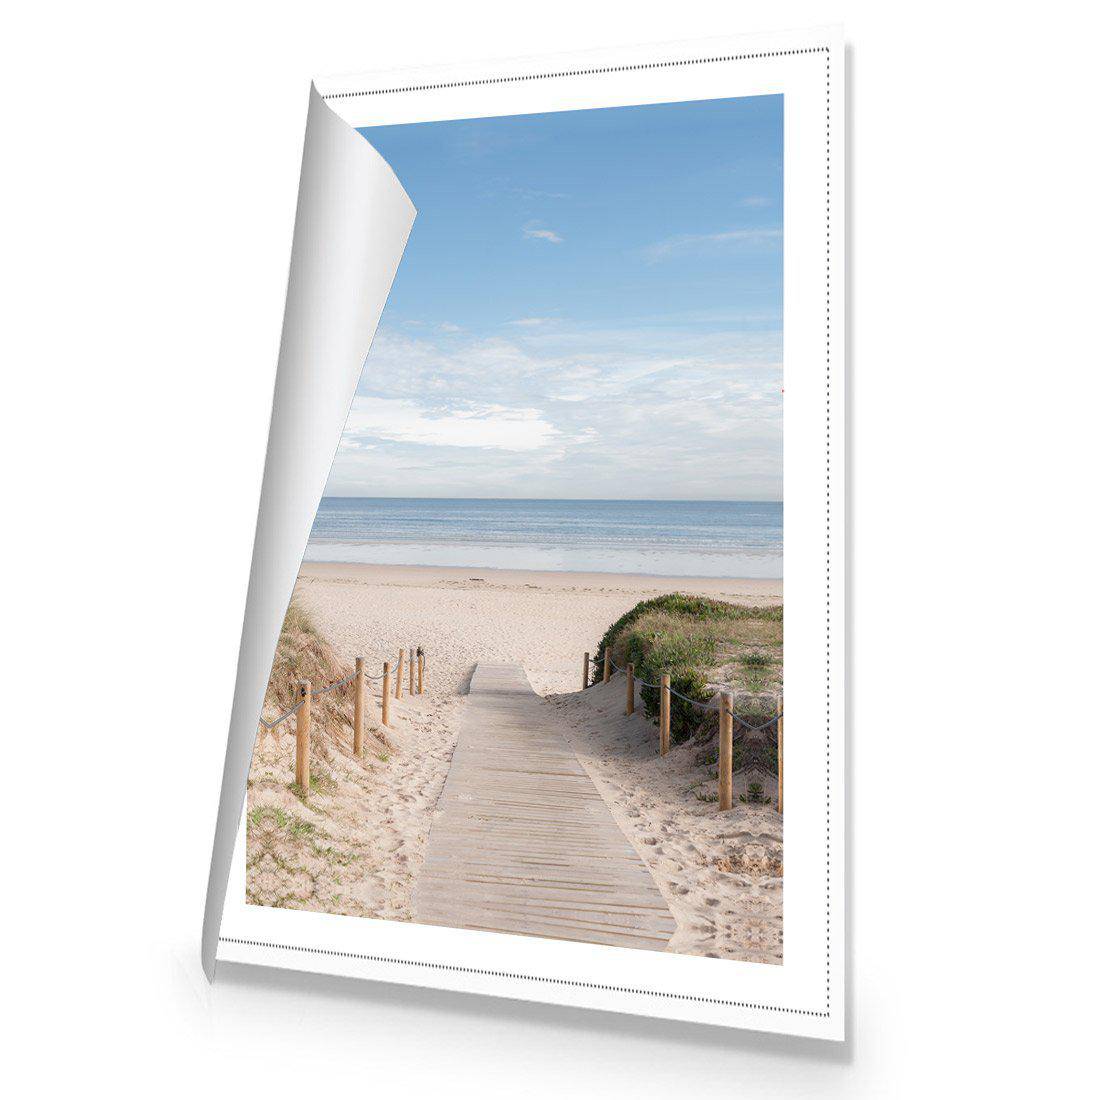 Pathway To The Sea Canvas Art-Canvas-Wall Art Designs-45x30cm-Rolled Canvas-Wall Art Designs